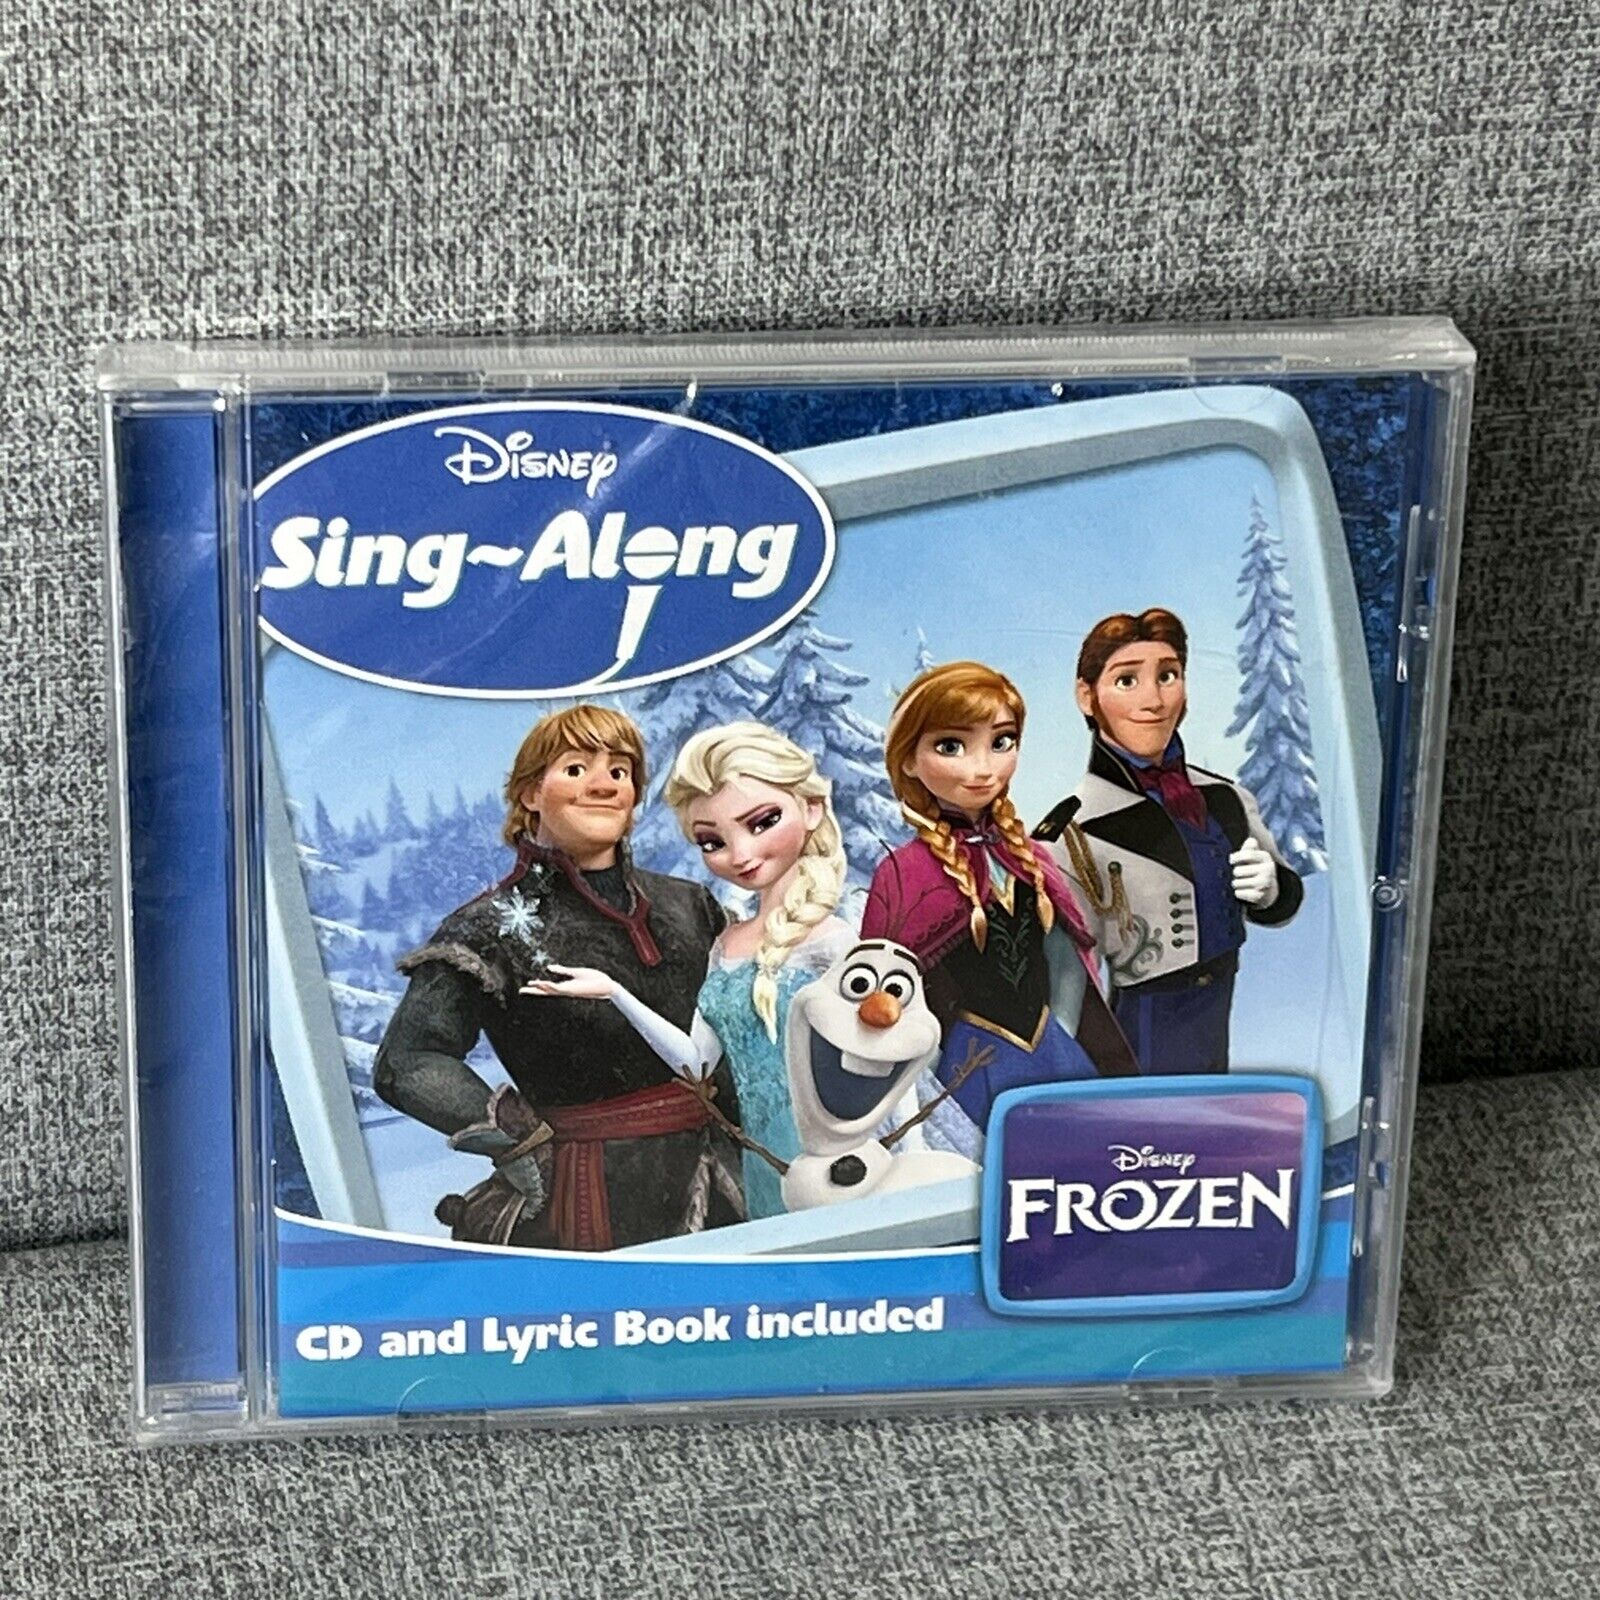 Disney Sing Along Frozen Various Audio CD Lyric Book Included New